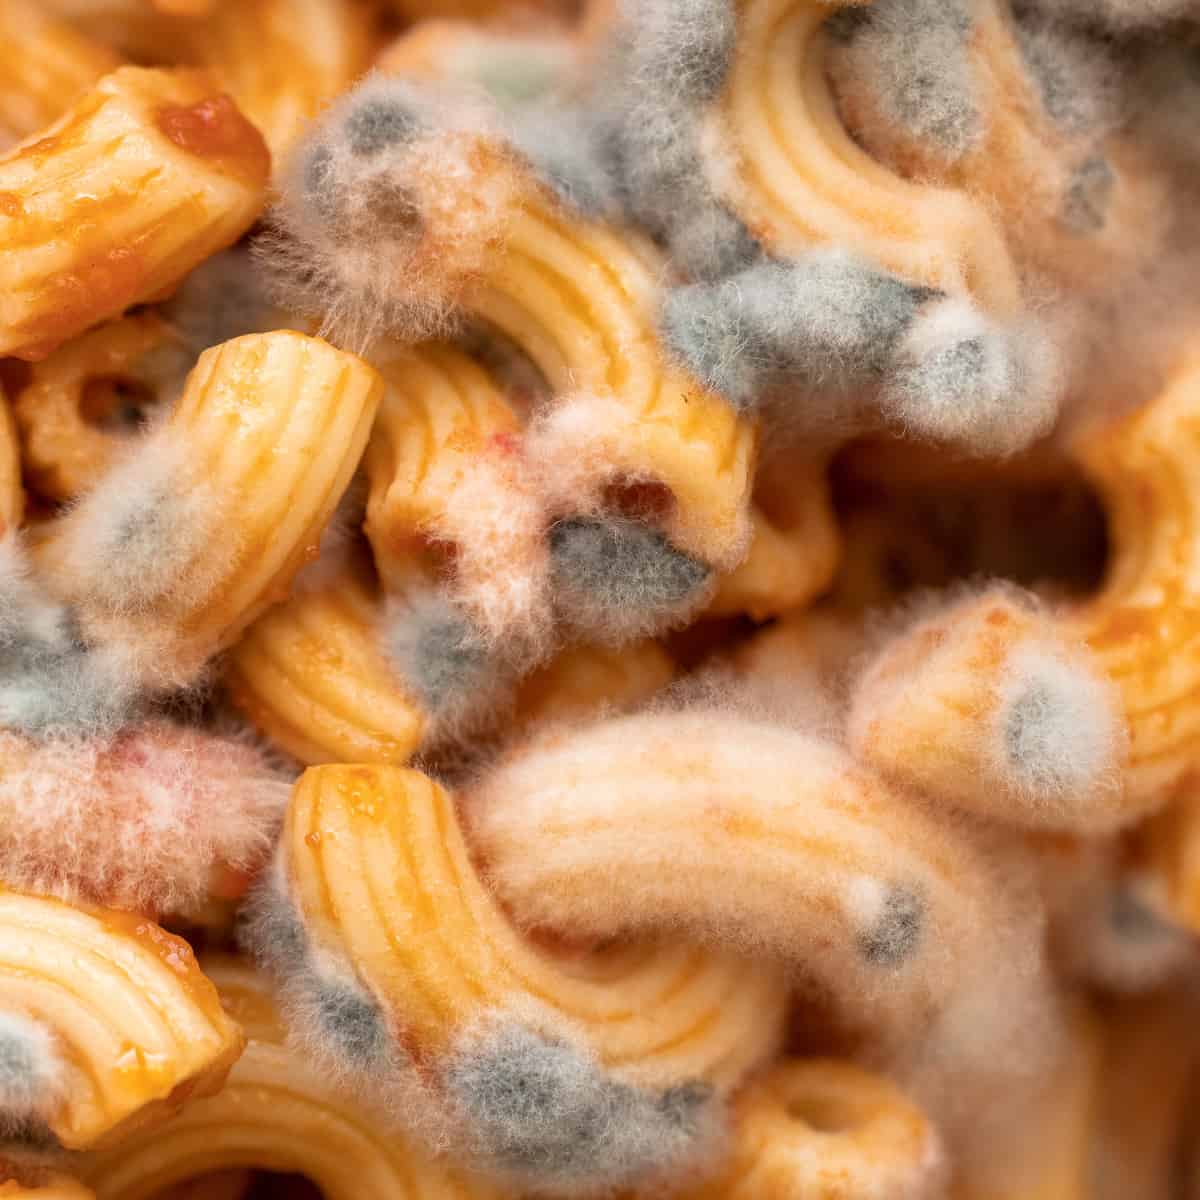 up close of elbow macaroni with red sauce growing mold